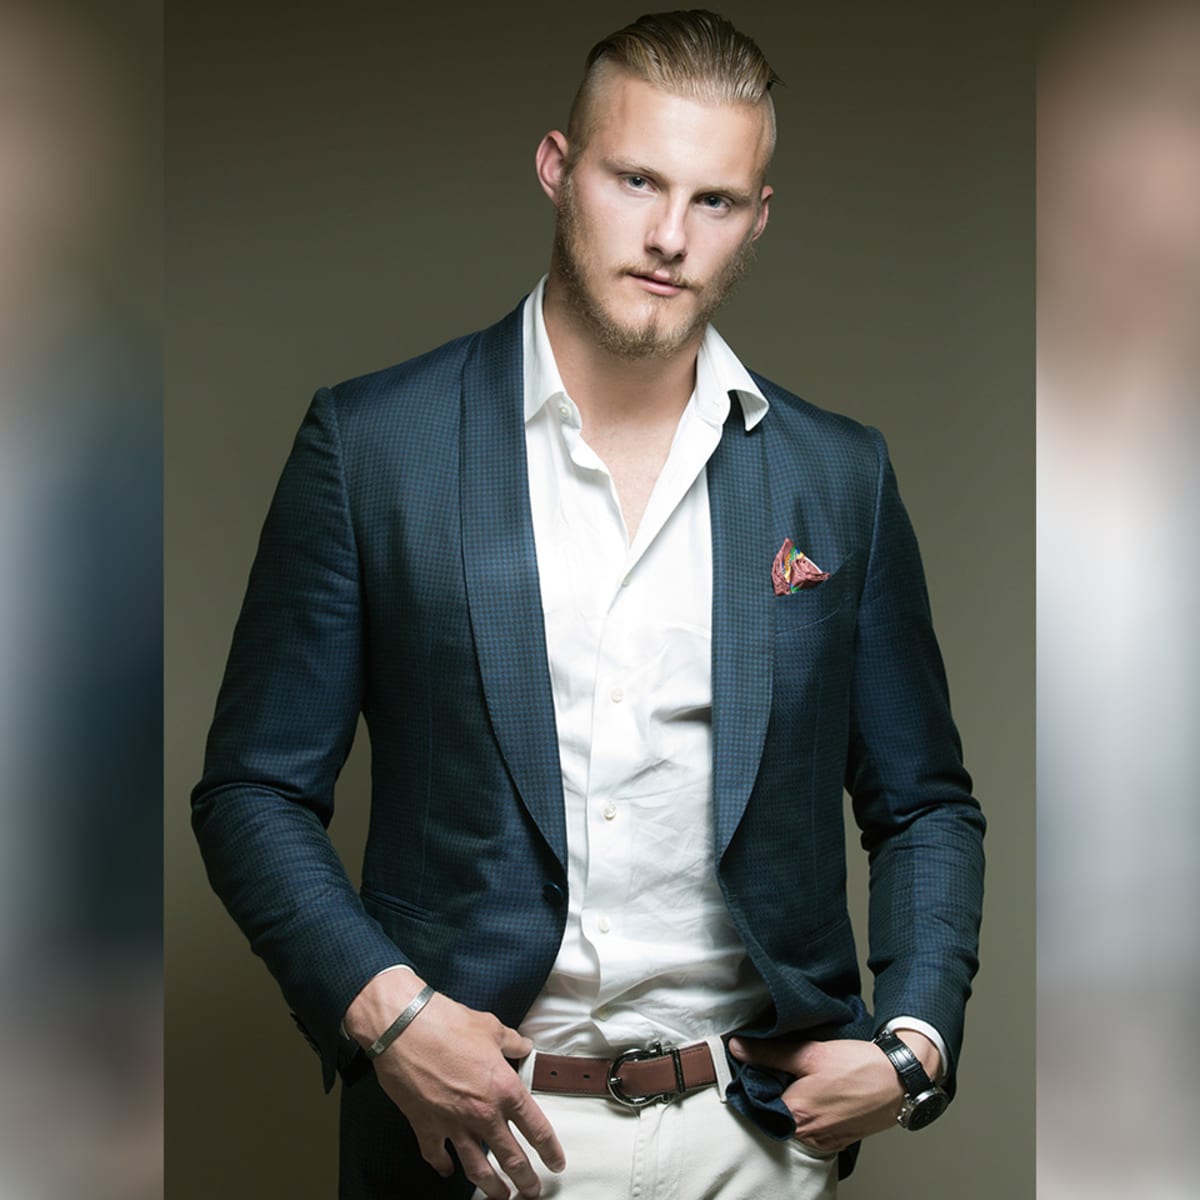 Vikings 8 x 10 Photo Alexander Ludwig/Bjorn Lothbrok Young & Sexy Grey Sky  kn at 's Entertainment Collectibles Store